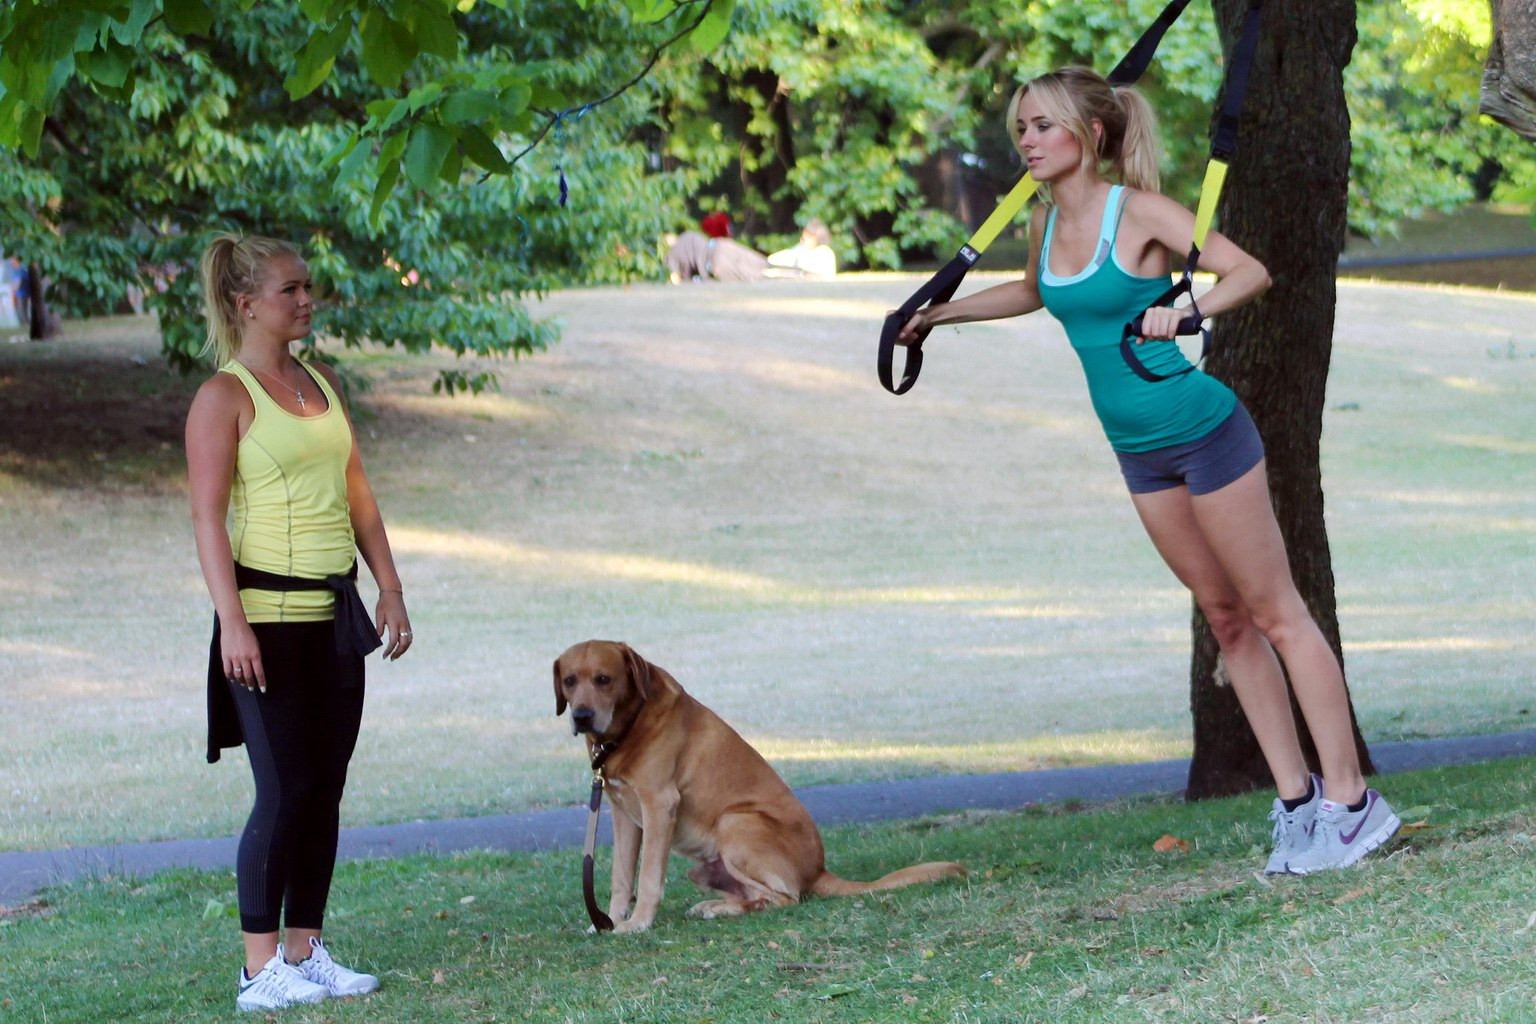 Kimberley Garner working out in a park #75153009